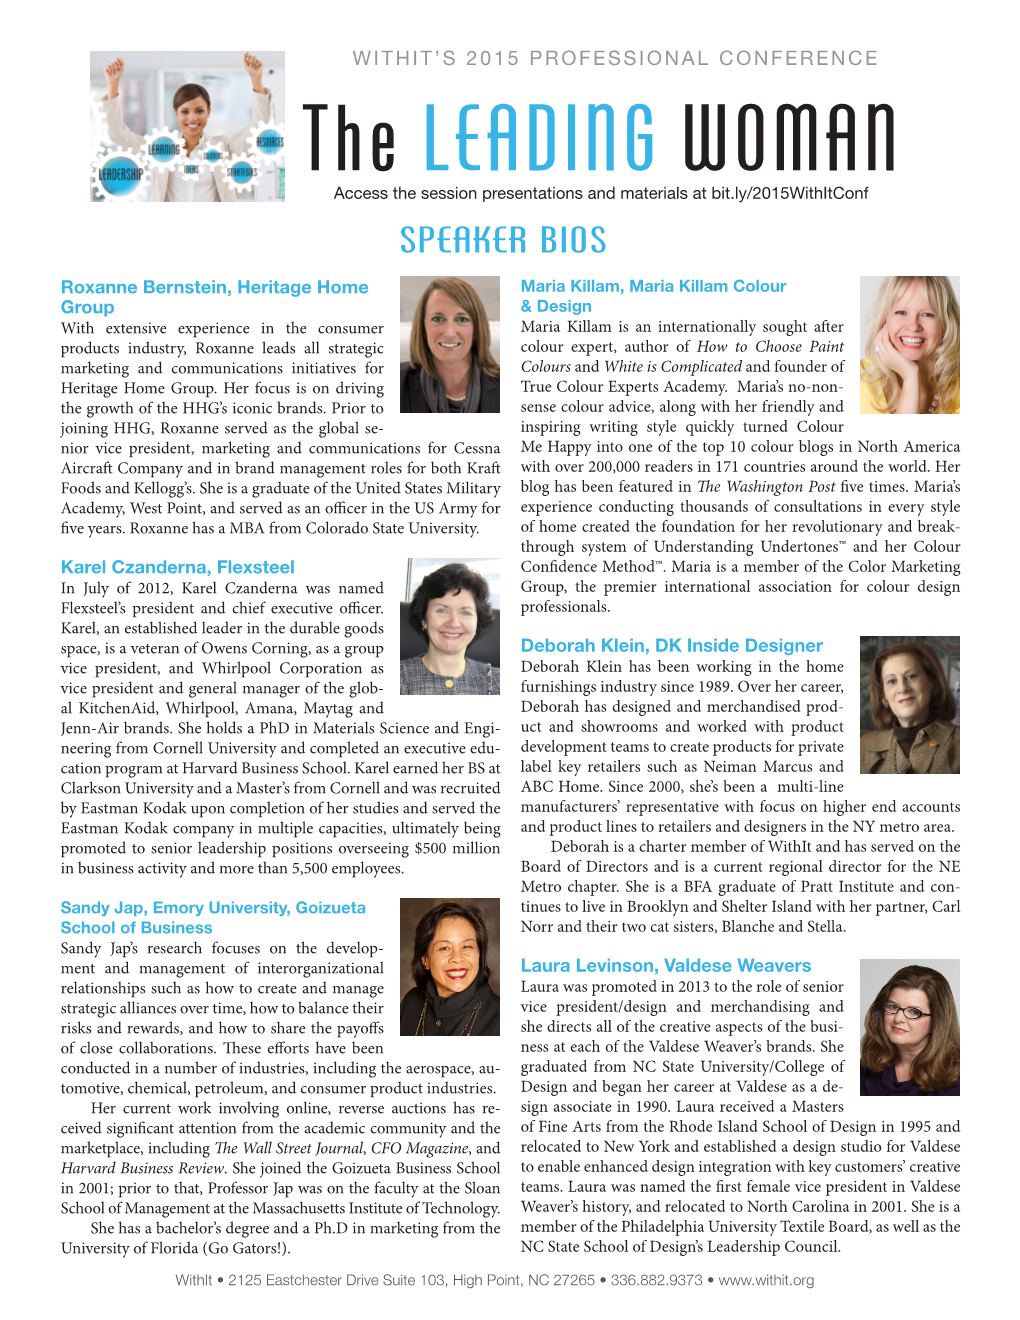 The LEADING WOMAN Access the Session Presentations and Materials at Bit.Ly/2015Withitconf SPEAKER BIOS